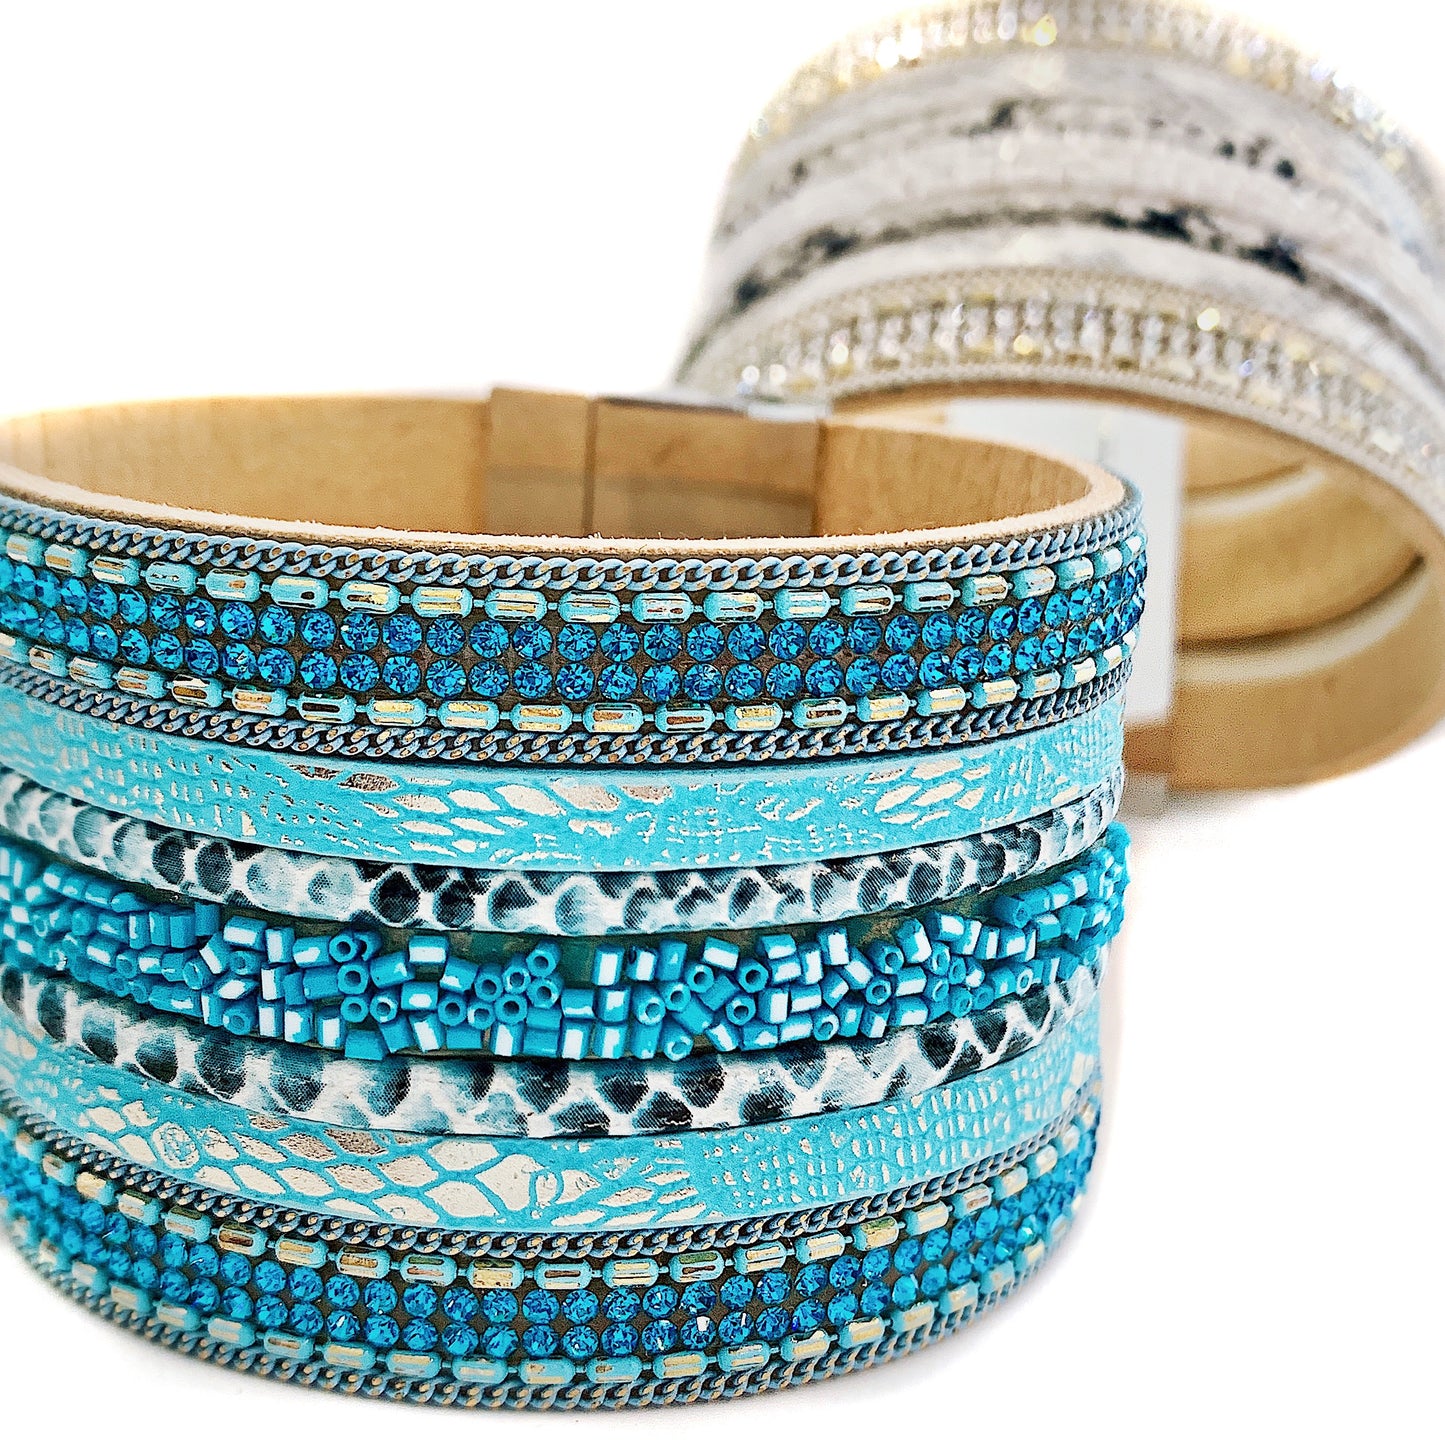 Oceana Seed Bead and Leather Cuff Bracelet